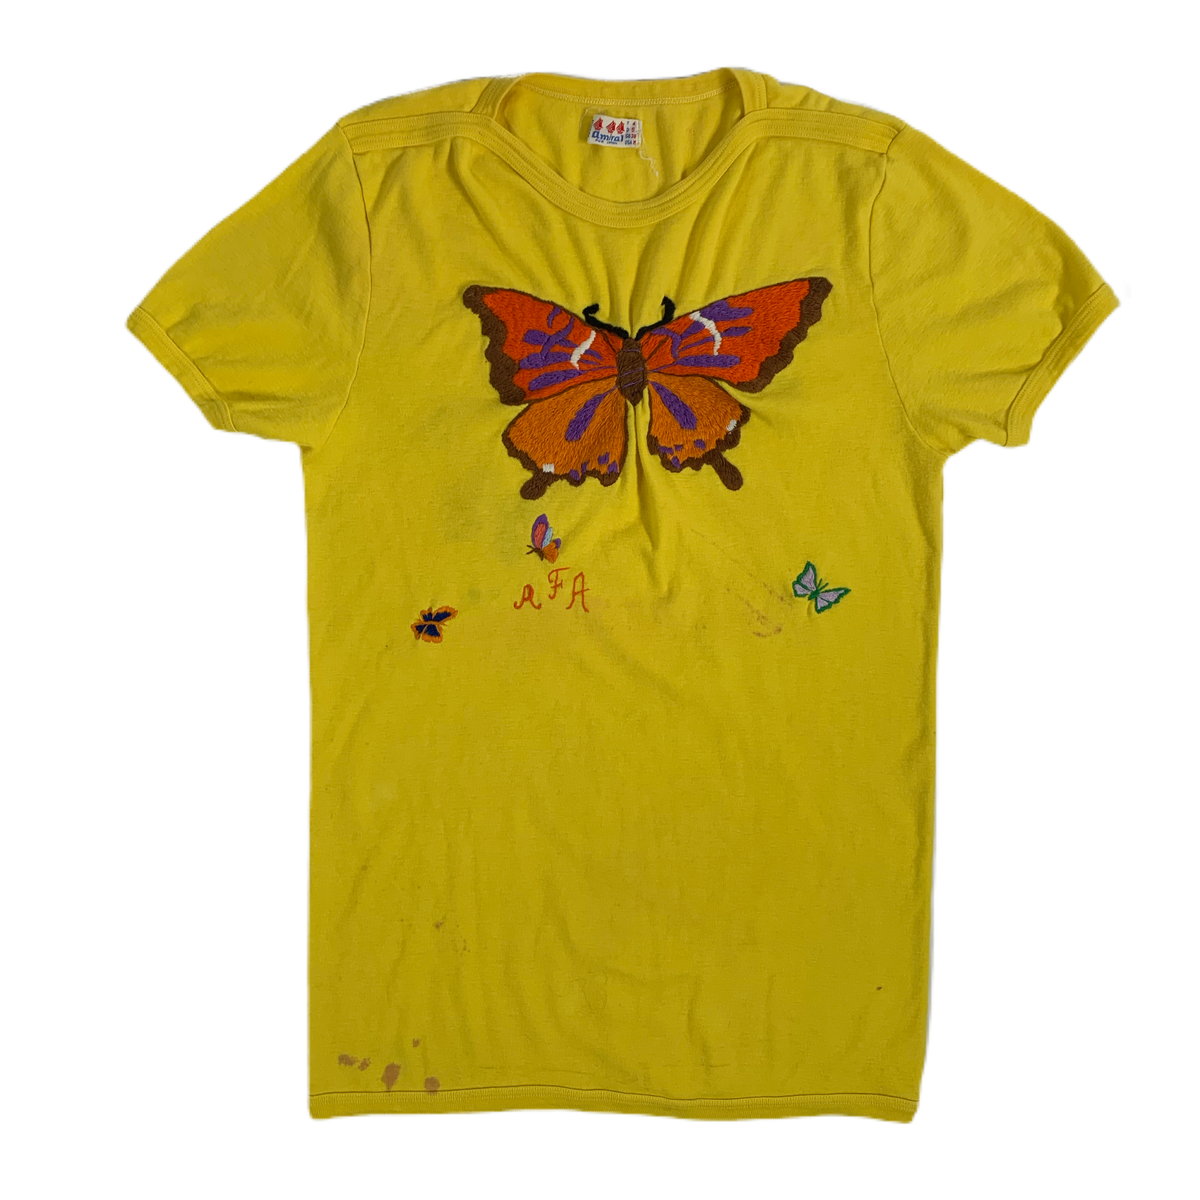 Vintage Original Amiral Embroidered Butterfly Shirt